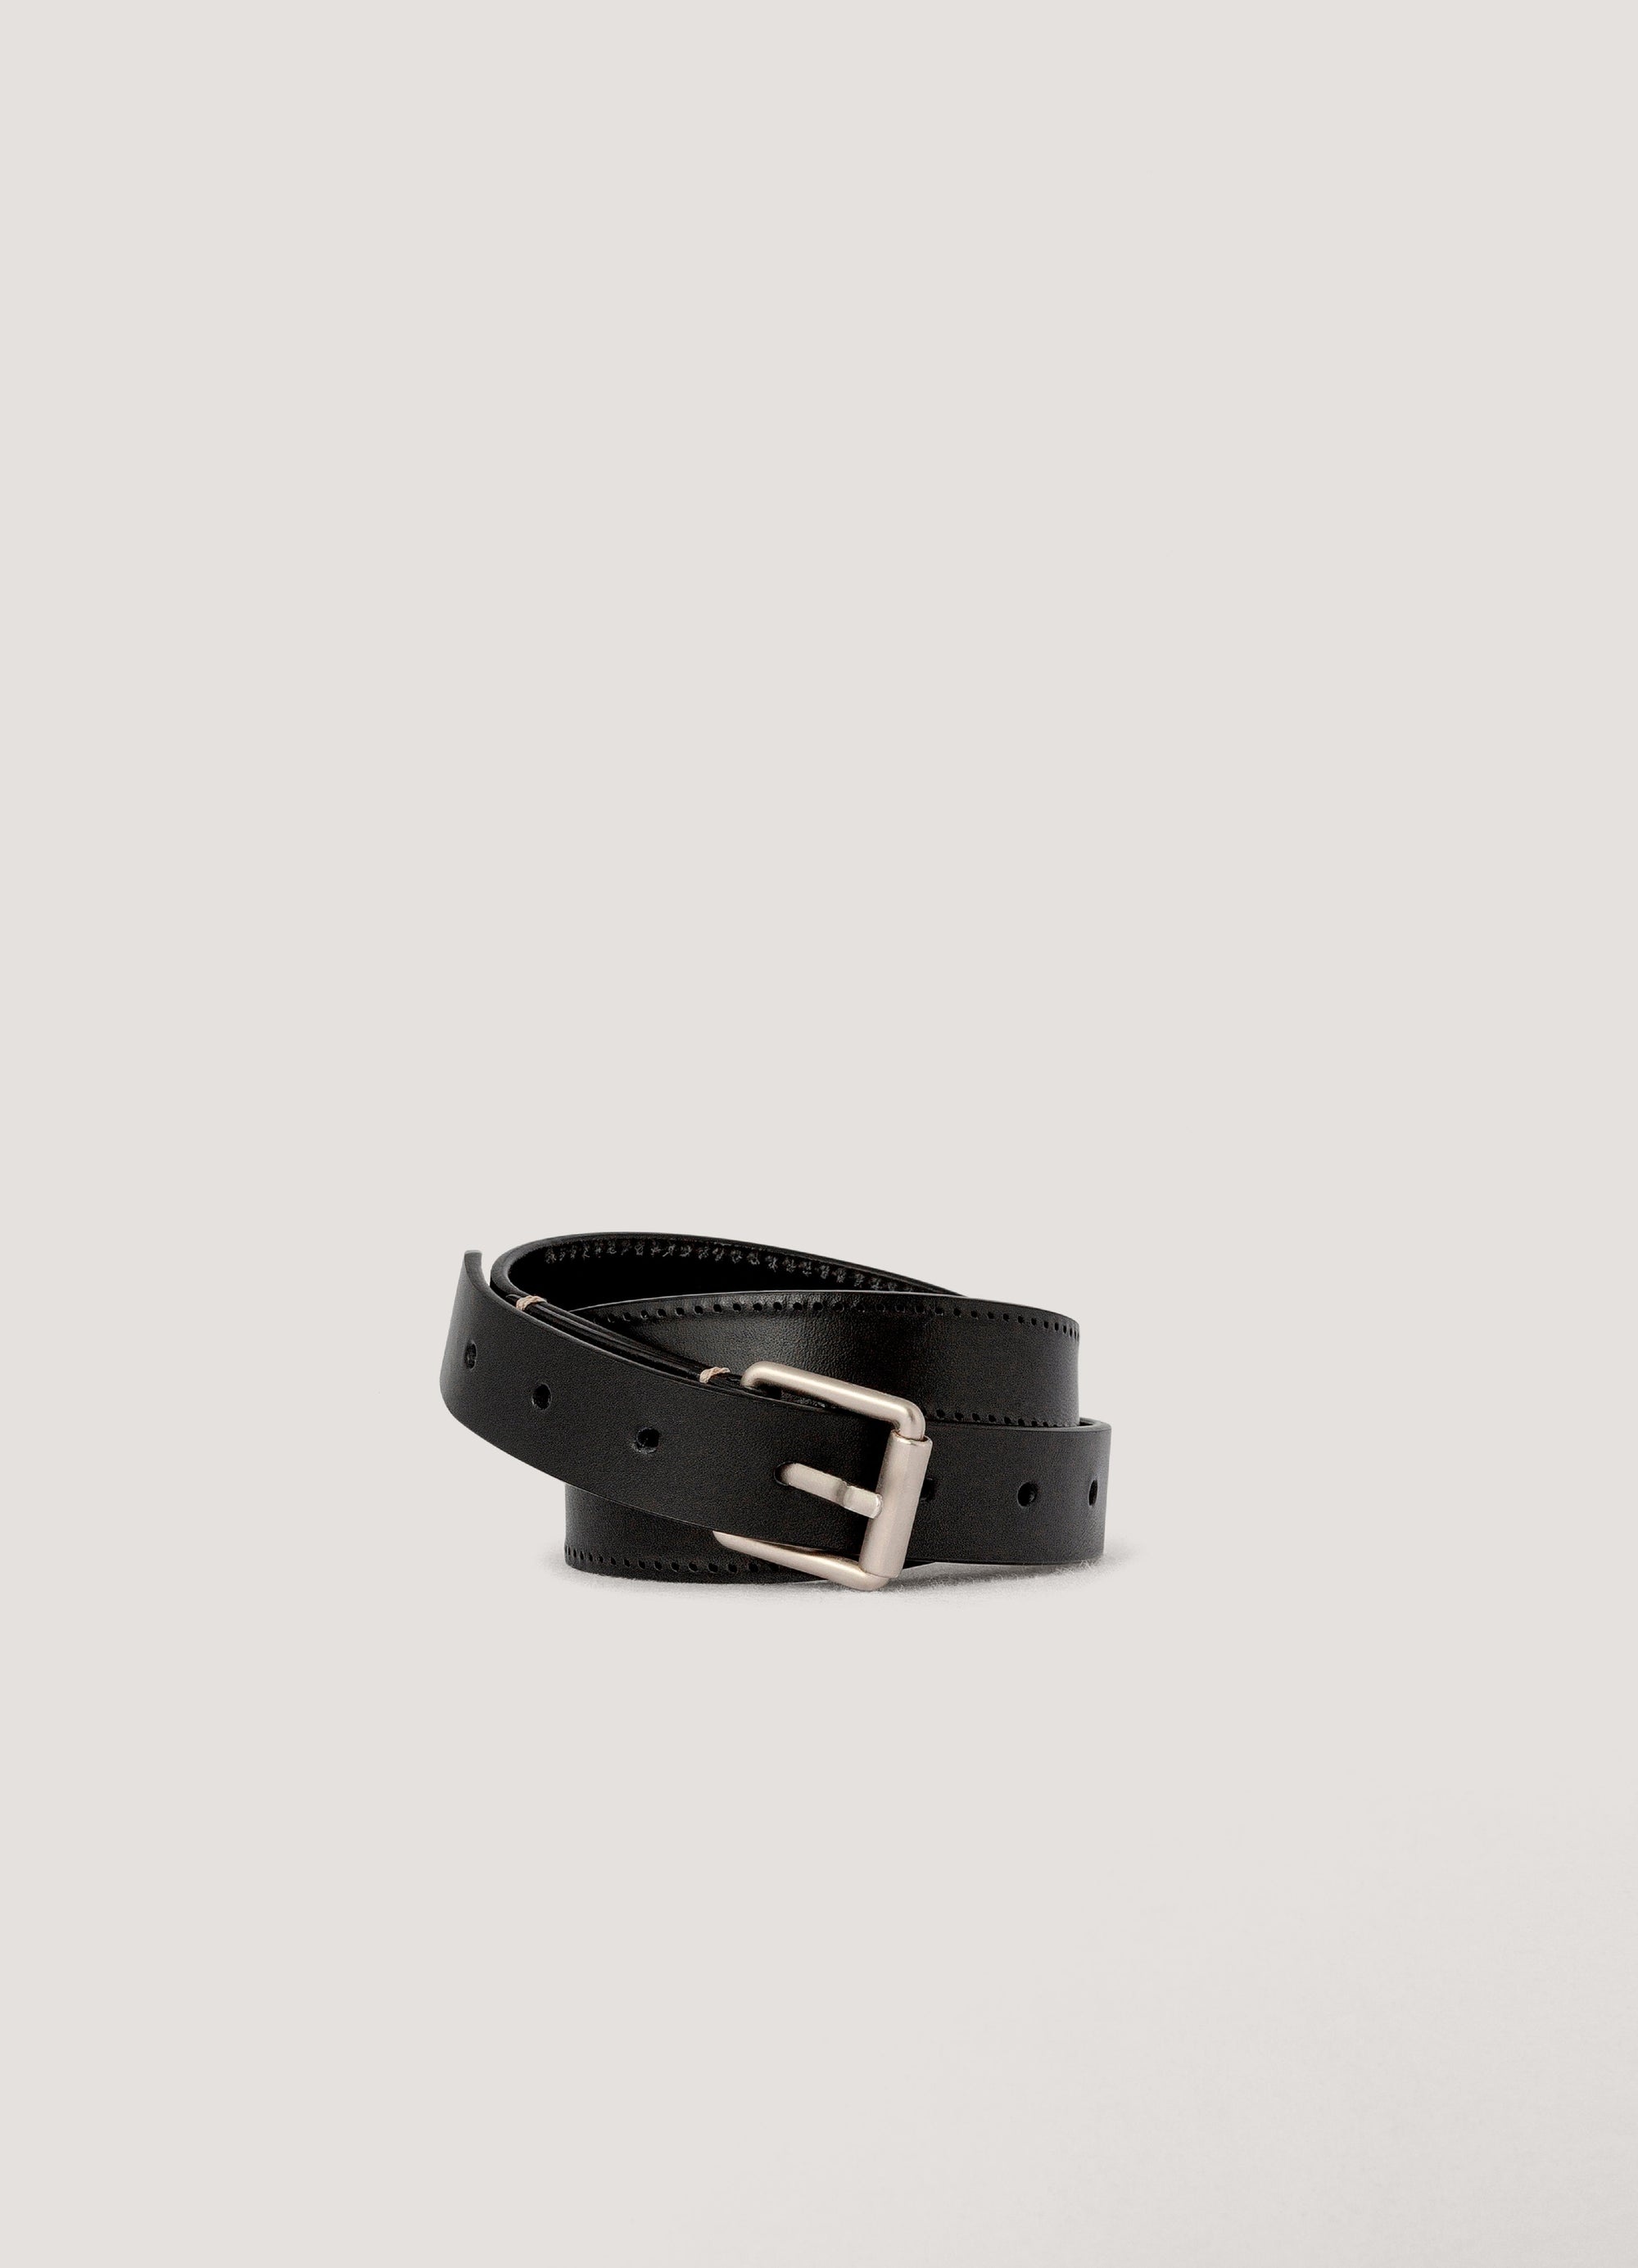 REVERSED THIN BELT
COW LEATHER - 1